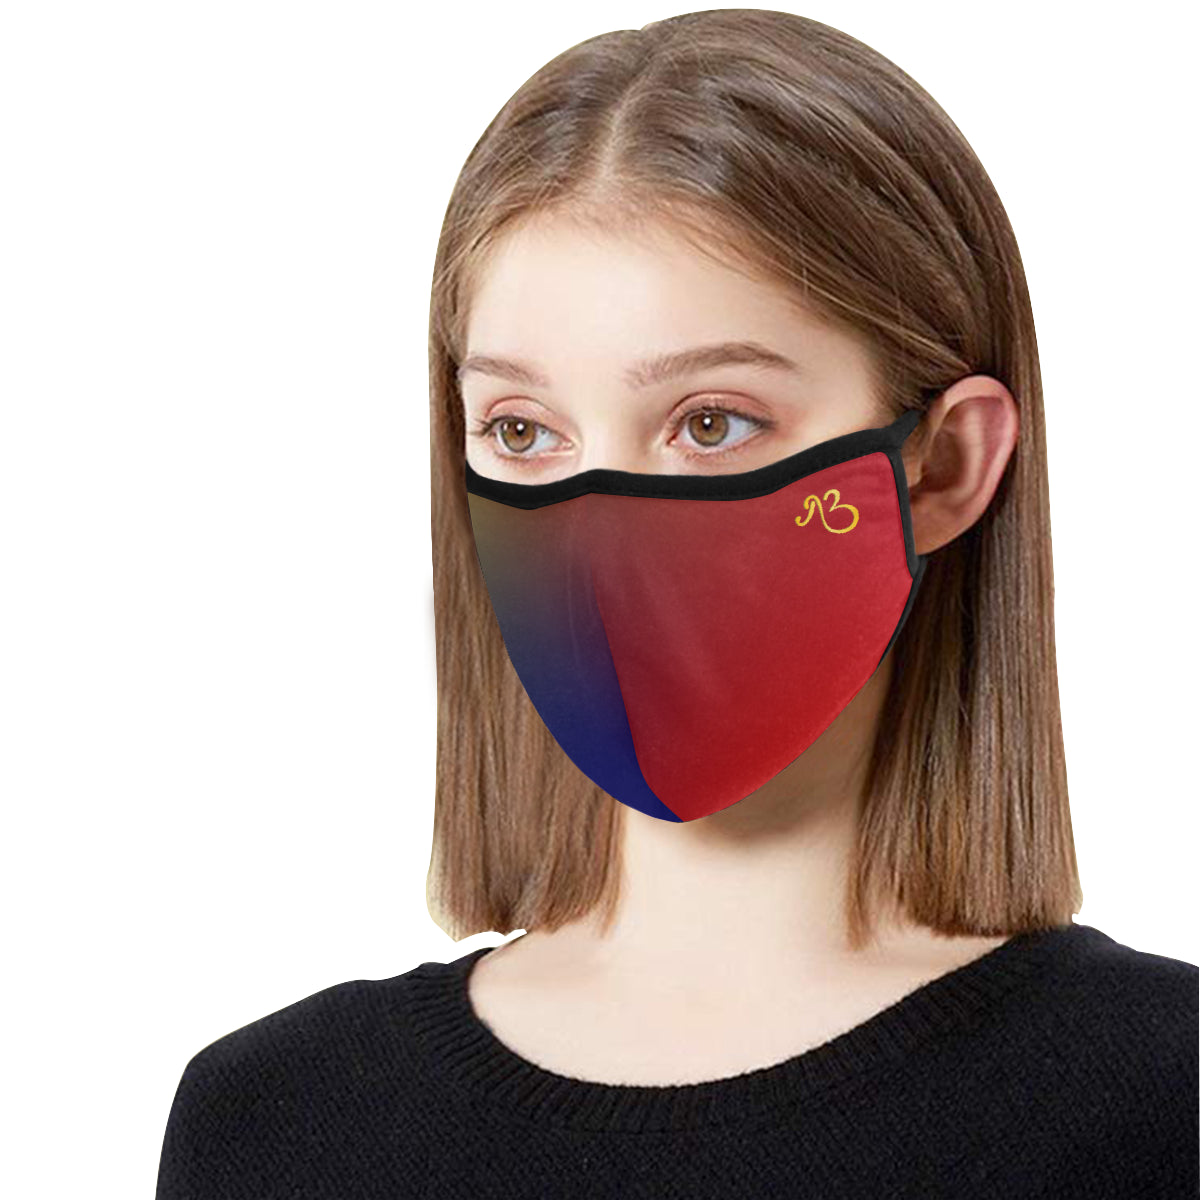 flyersetcinc Scarlet Galaxy Cotton Fabric Face Mask (30 Filters Included) - Non-medical use